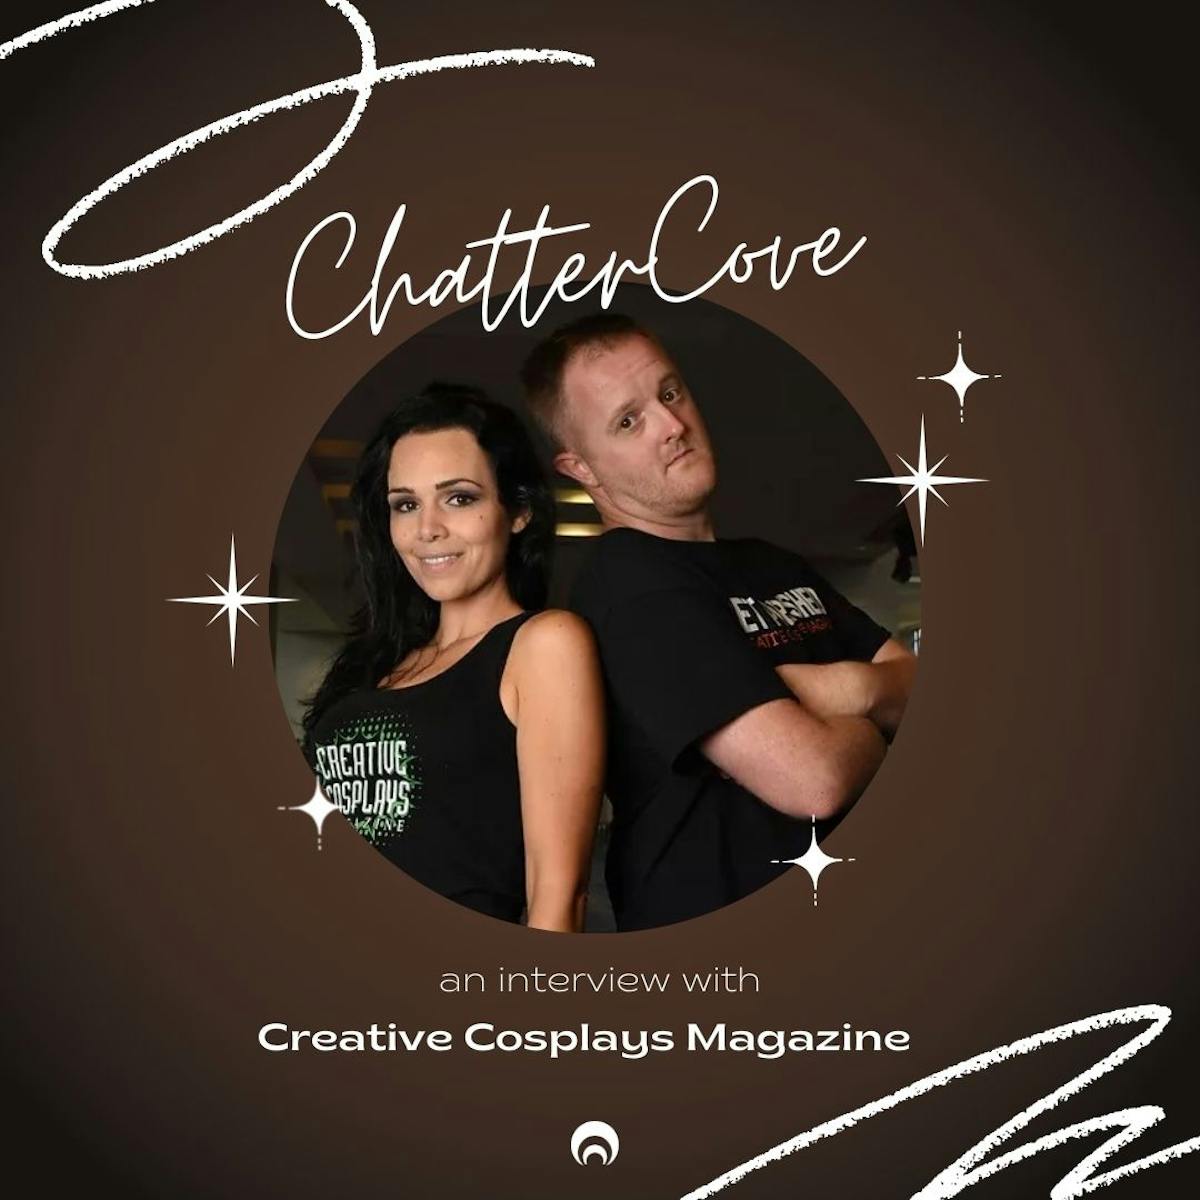 ChatterCove series with Creative Cosplays Magazine